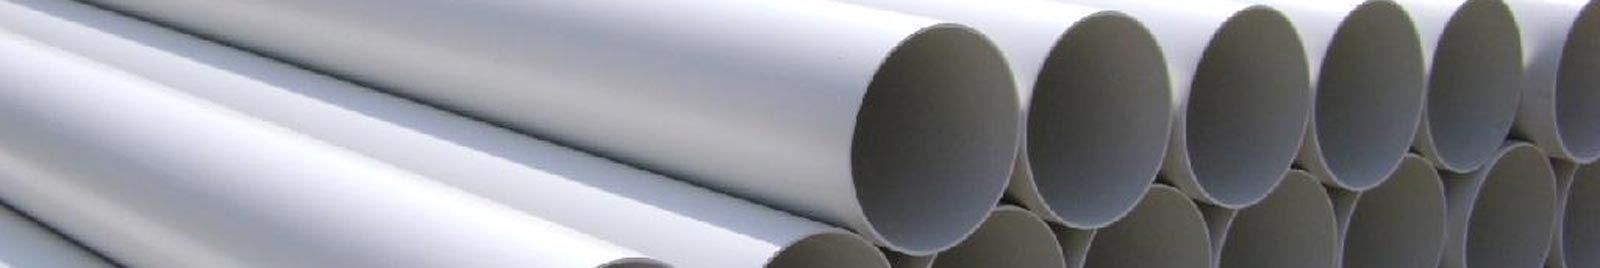 UPVC pipes manufacturers